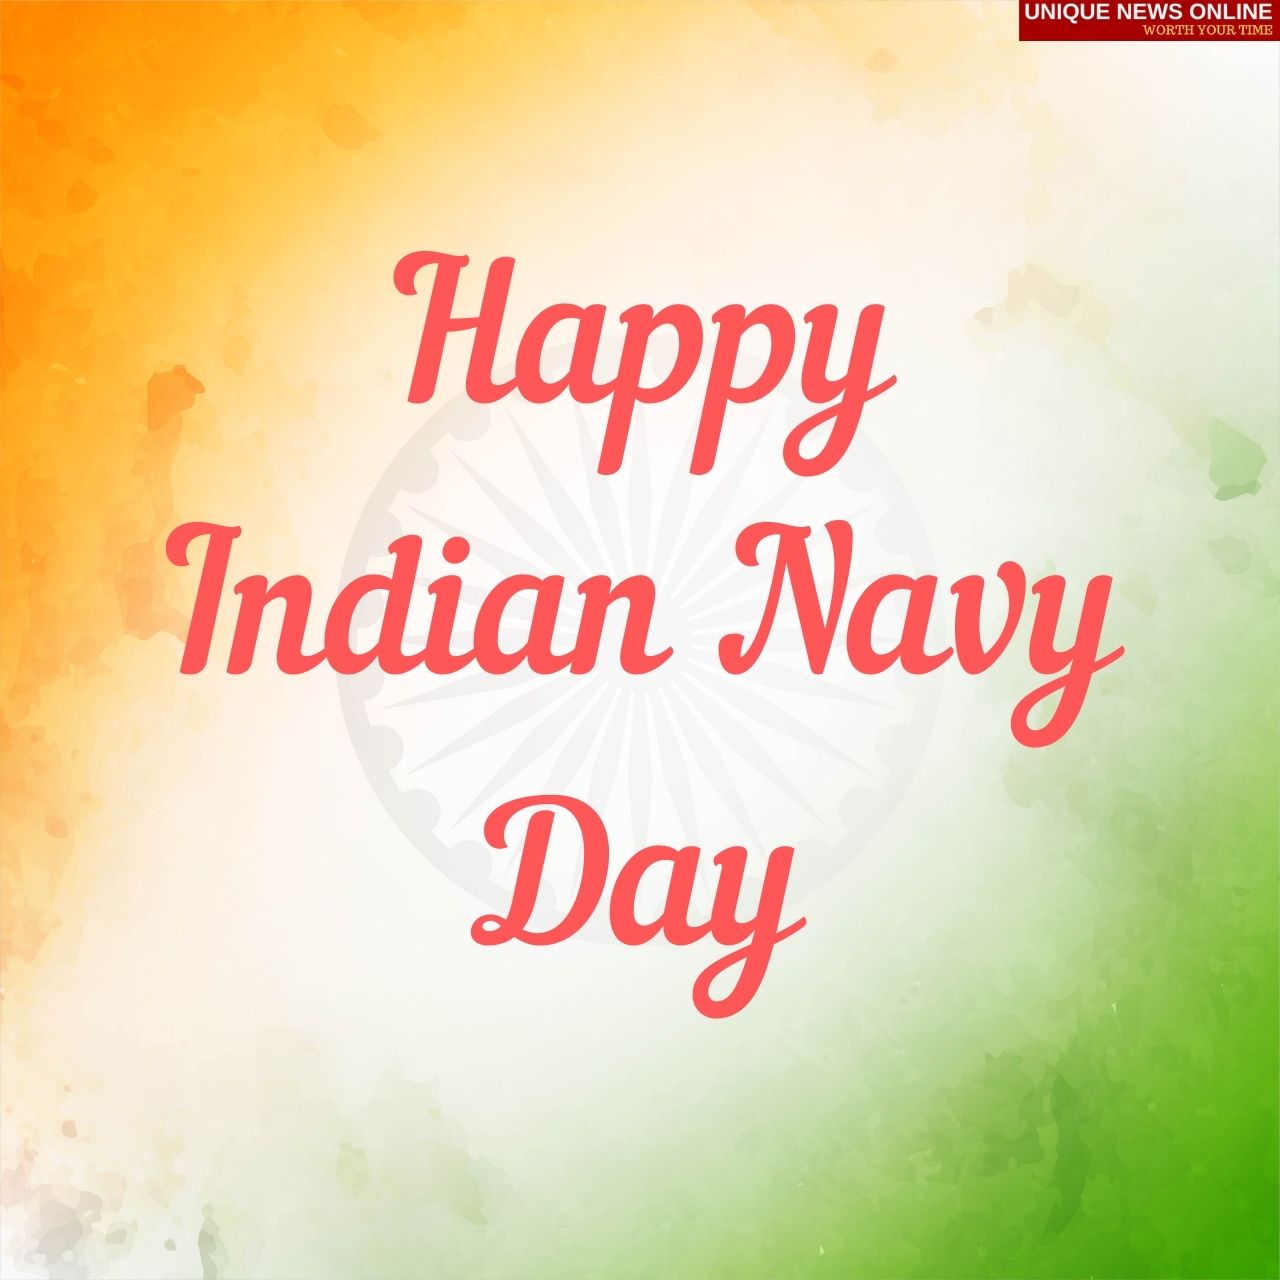 Happy Indian Navy Day 2021 Wishes, Quotes, HD Images, Messages, Greetings to Share